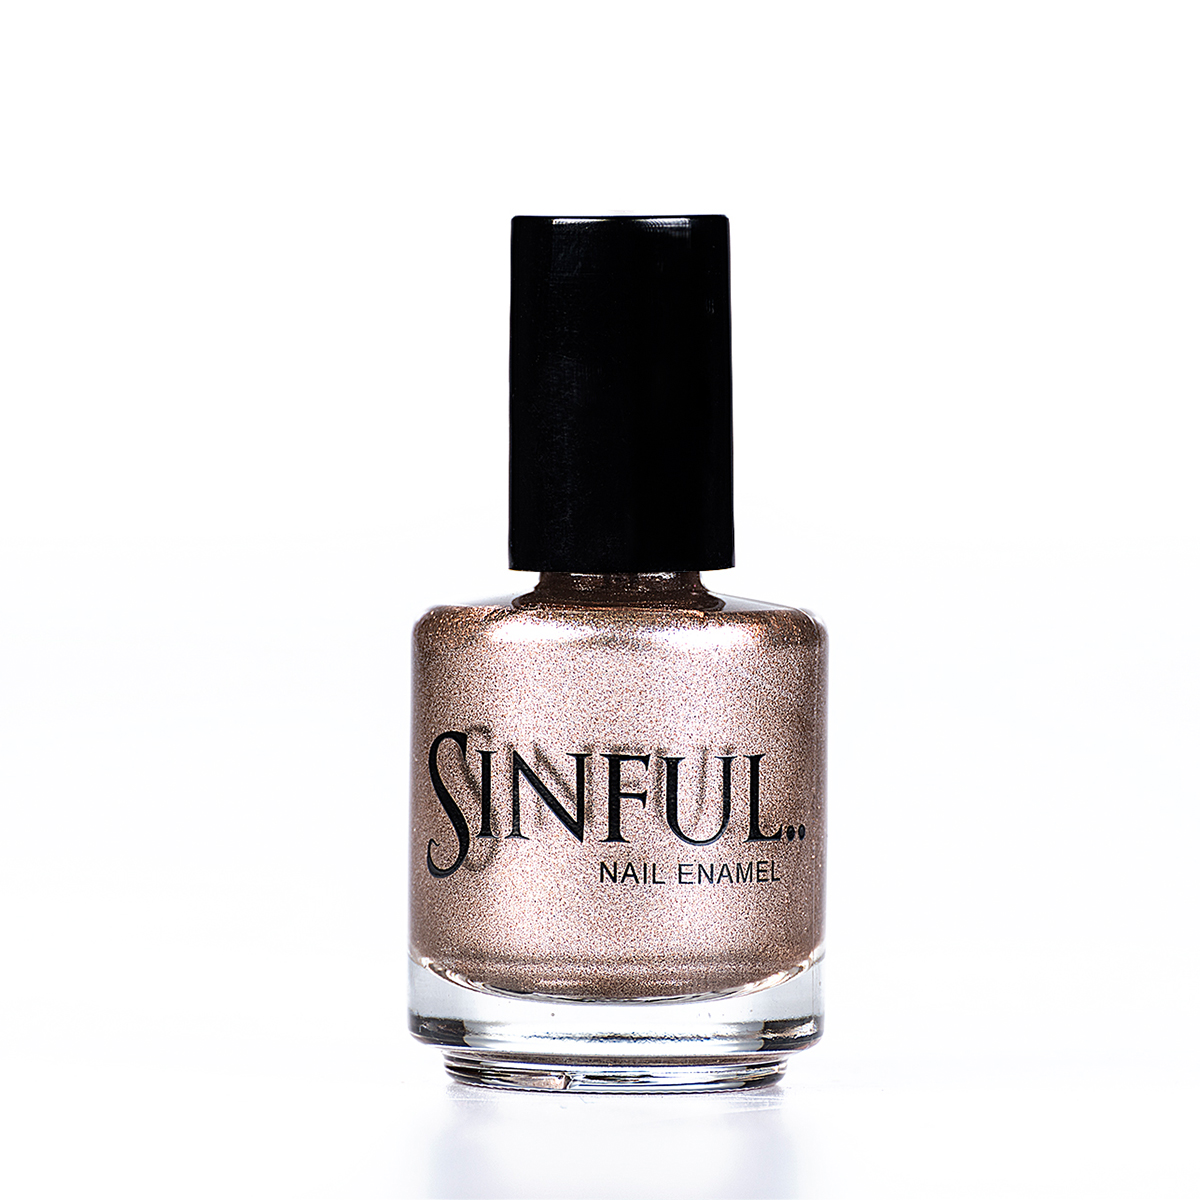 Foil finish gold with a slight rose gold tint. Sinful polishes are long lasting and chip resistant, however we do recommend using a Top Coat to finish every polish. This adds a high shine finish and extends the polish wear-time. 15ml